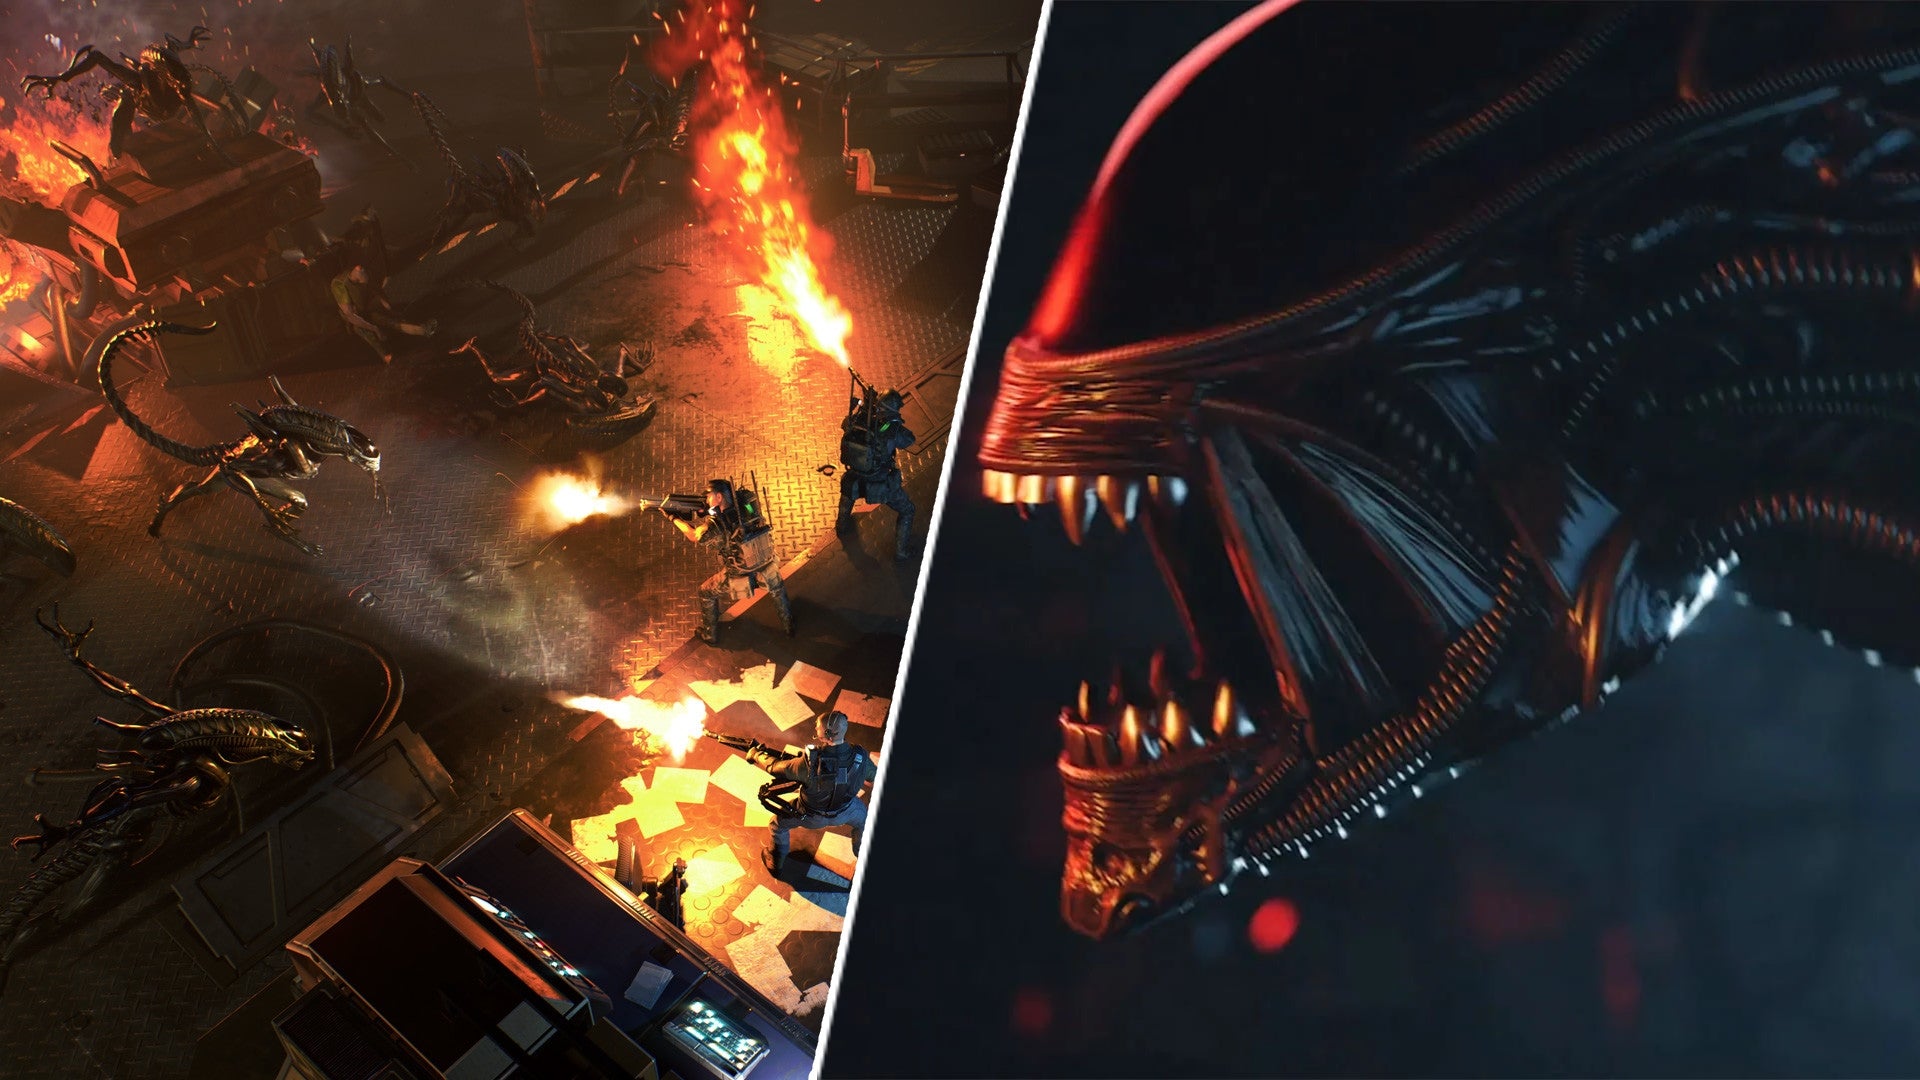 Image for Aliens: Dark Descent missions can take ‘anywhere between 20 minutes and an hour’